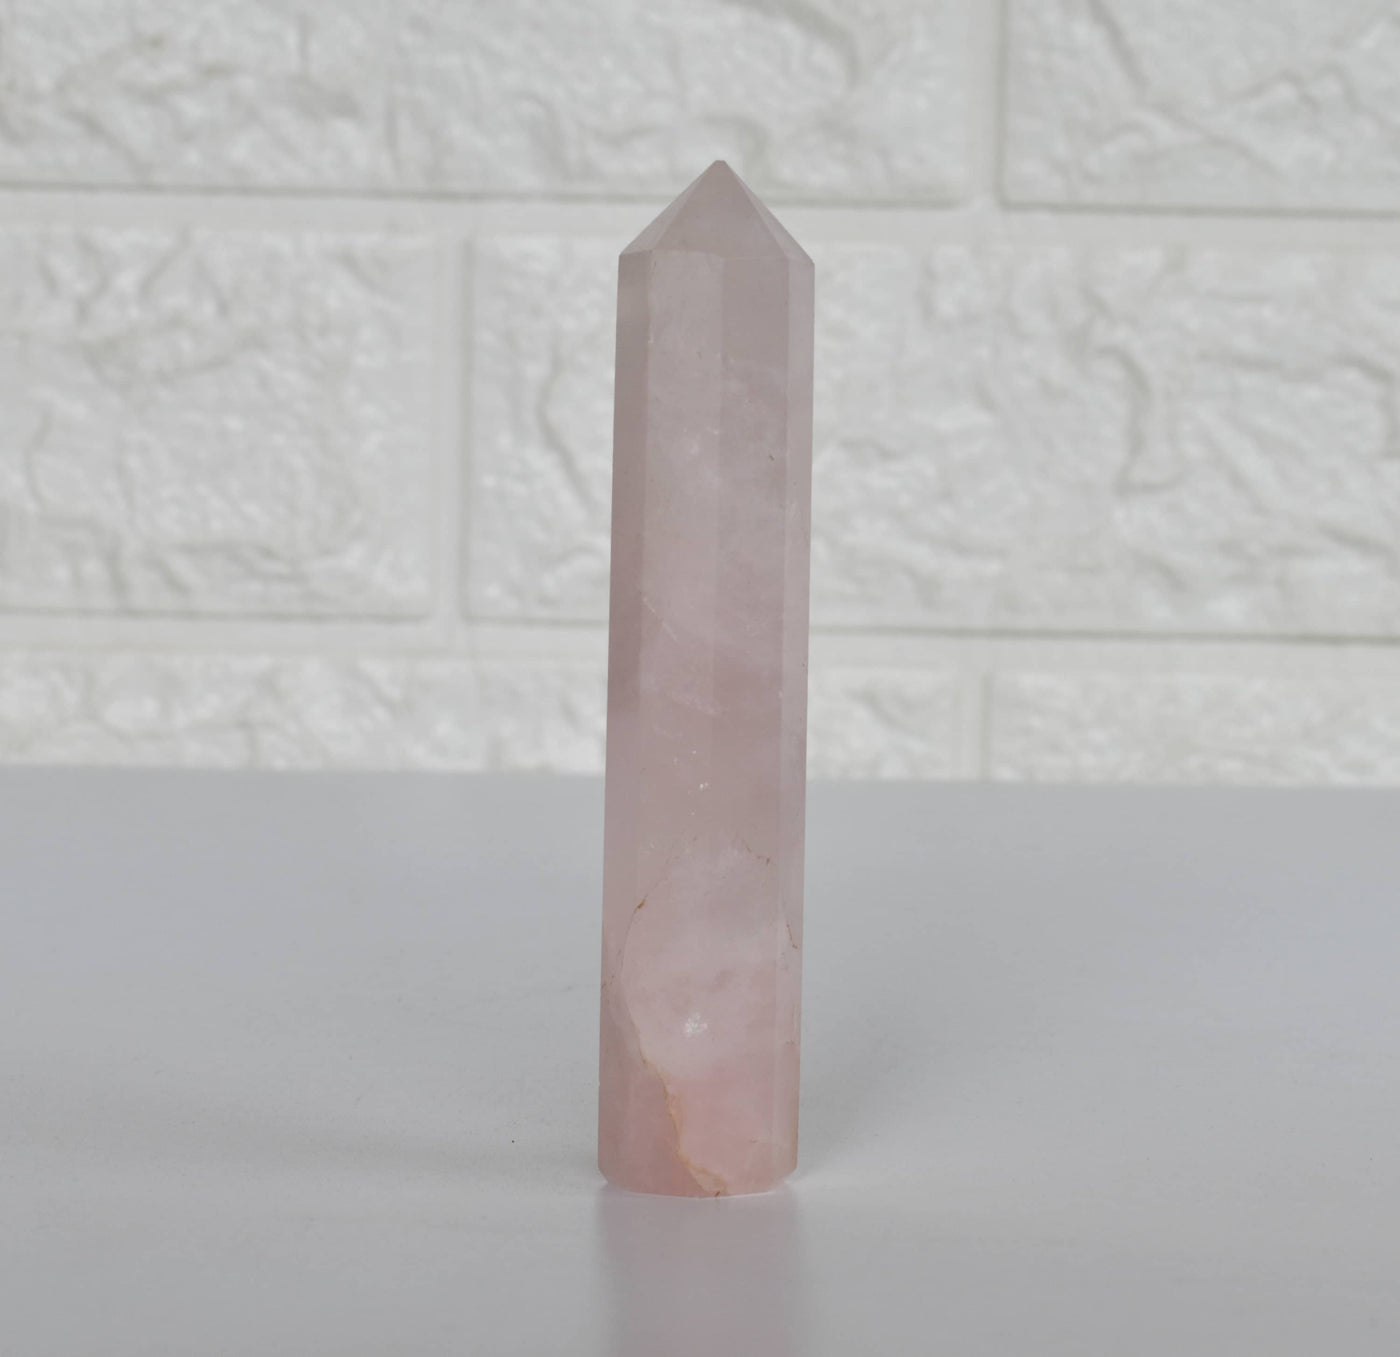 Pack of 3 Natural Crystal Tower Points, Genuine Quartz Crystal Wands